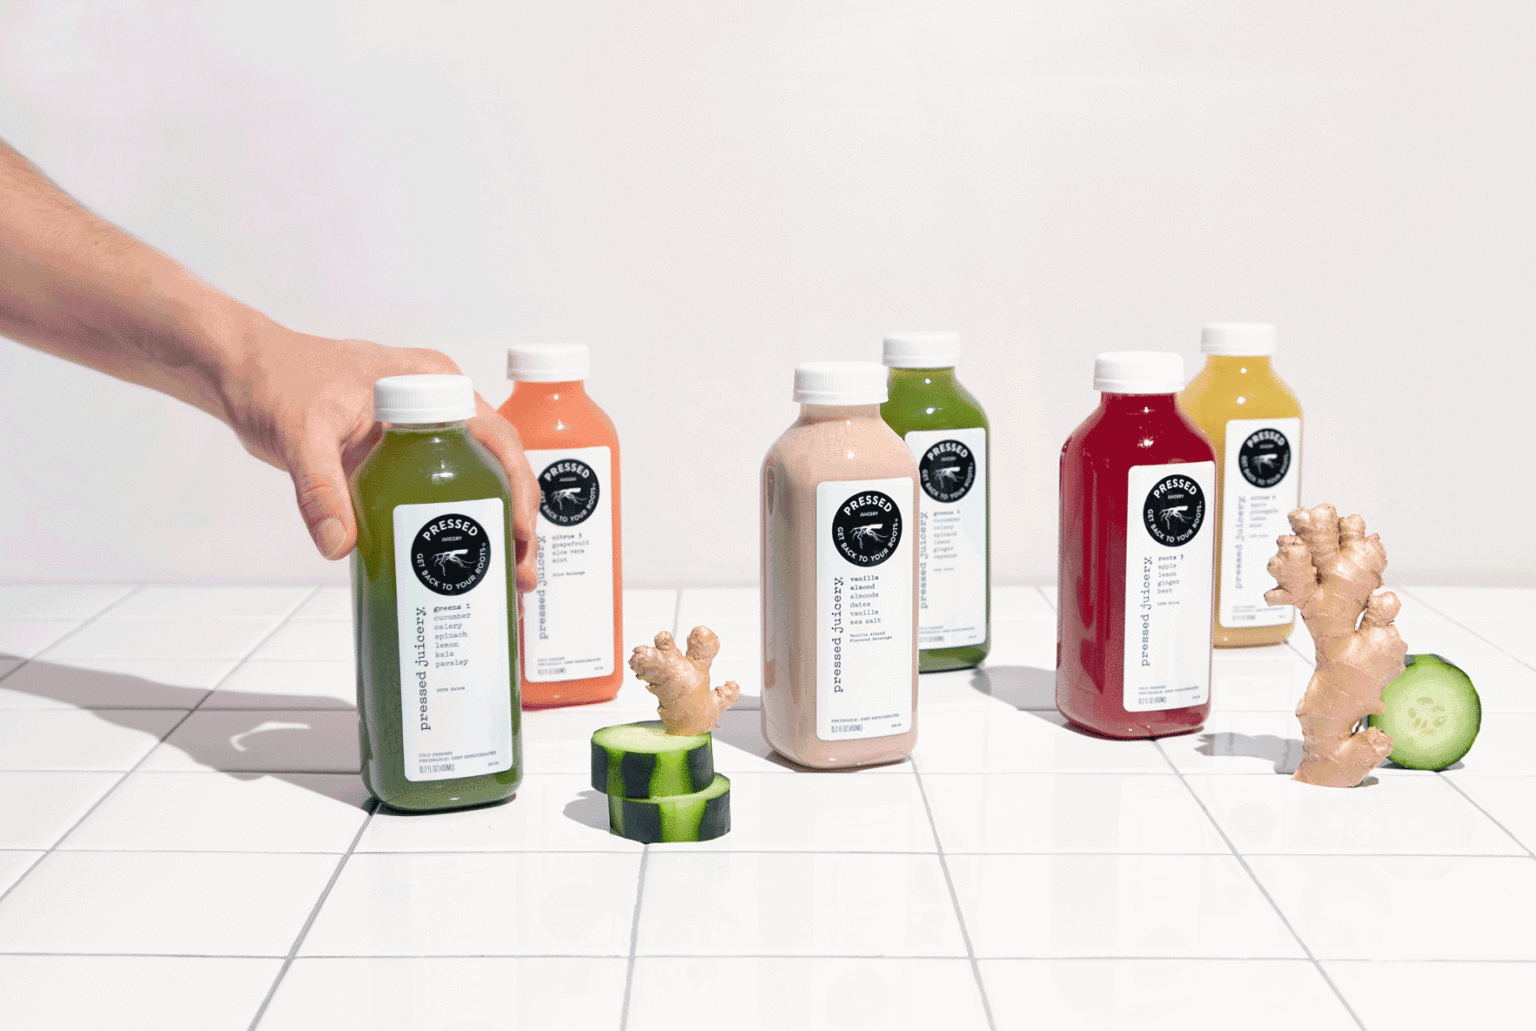 Pressed Juicery - the best cold-pressed juice near me is ...